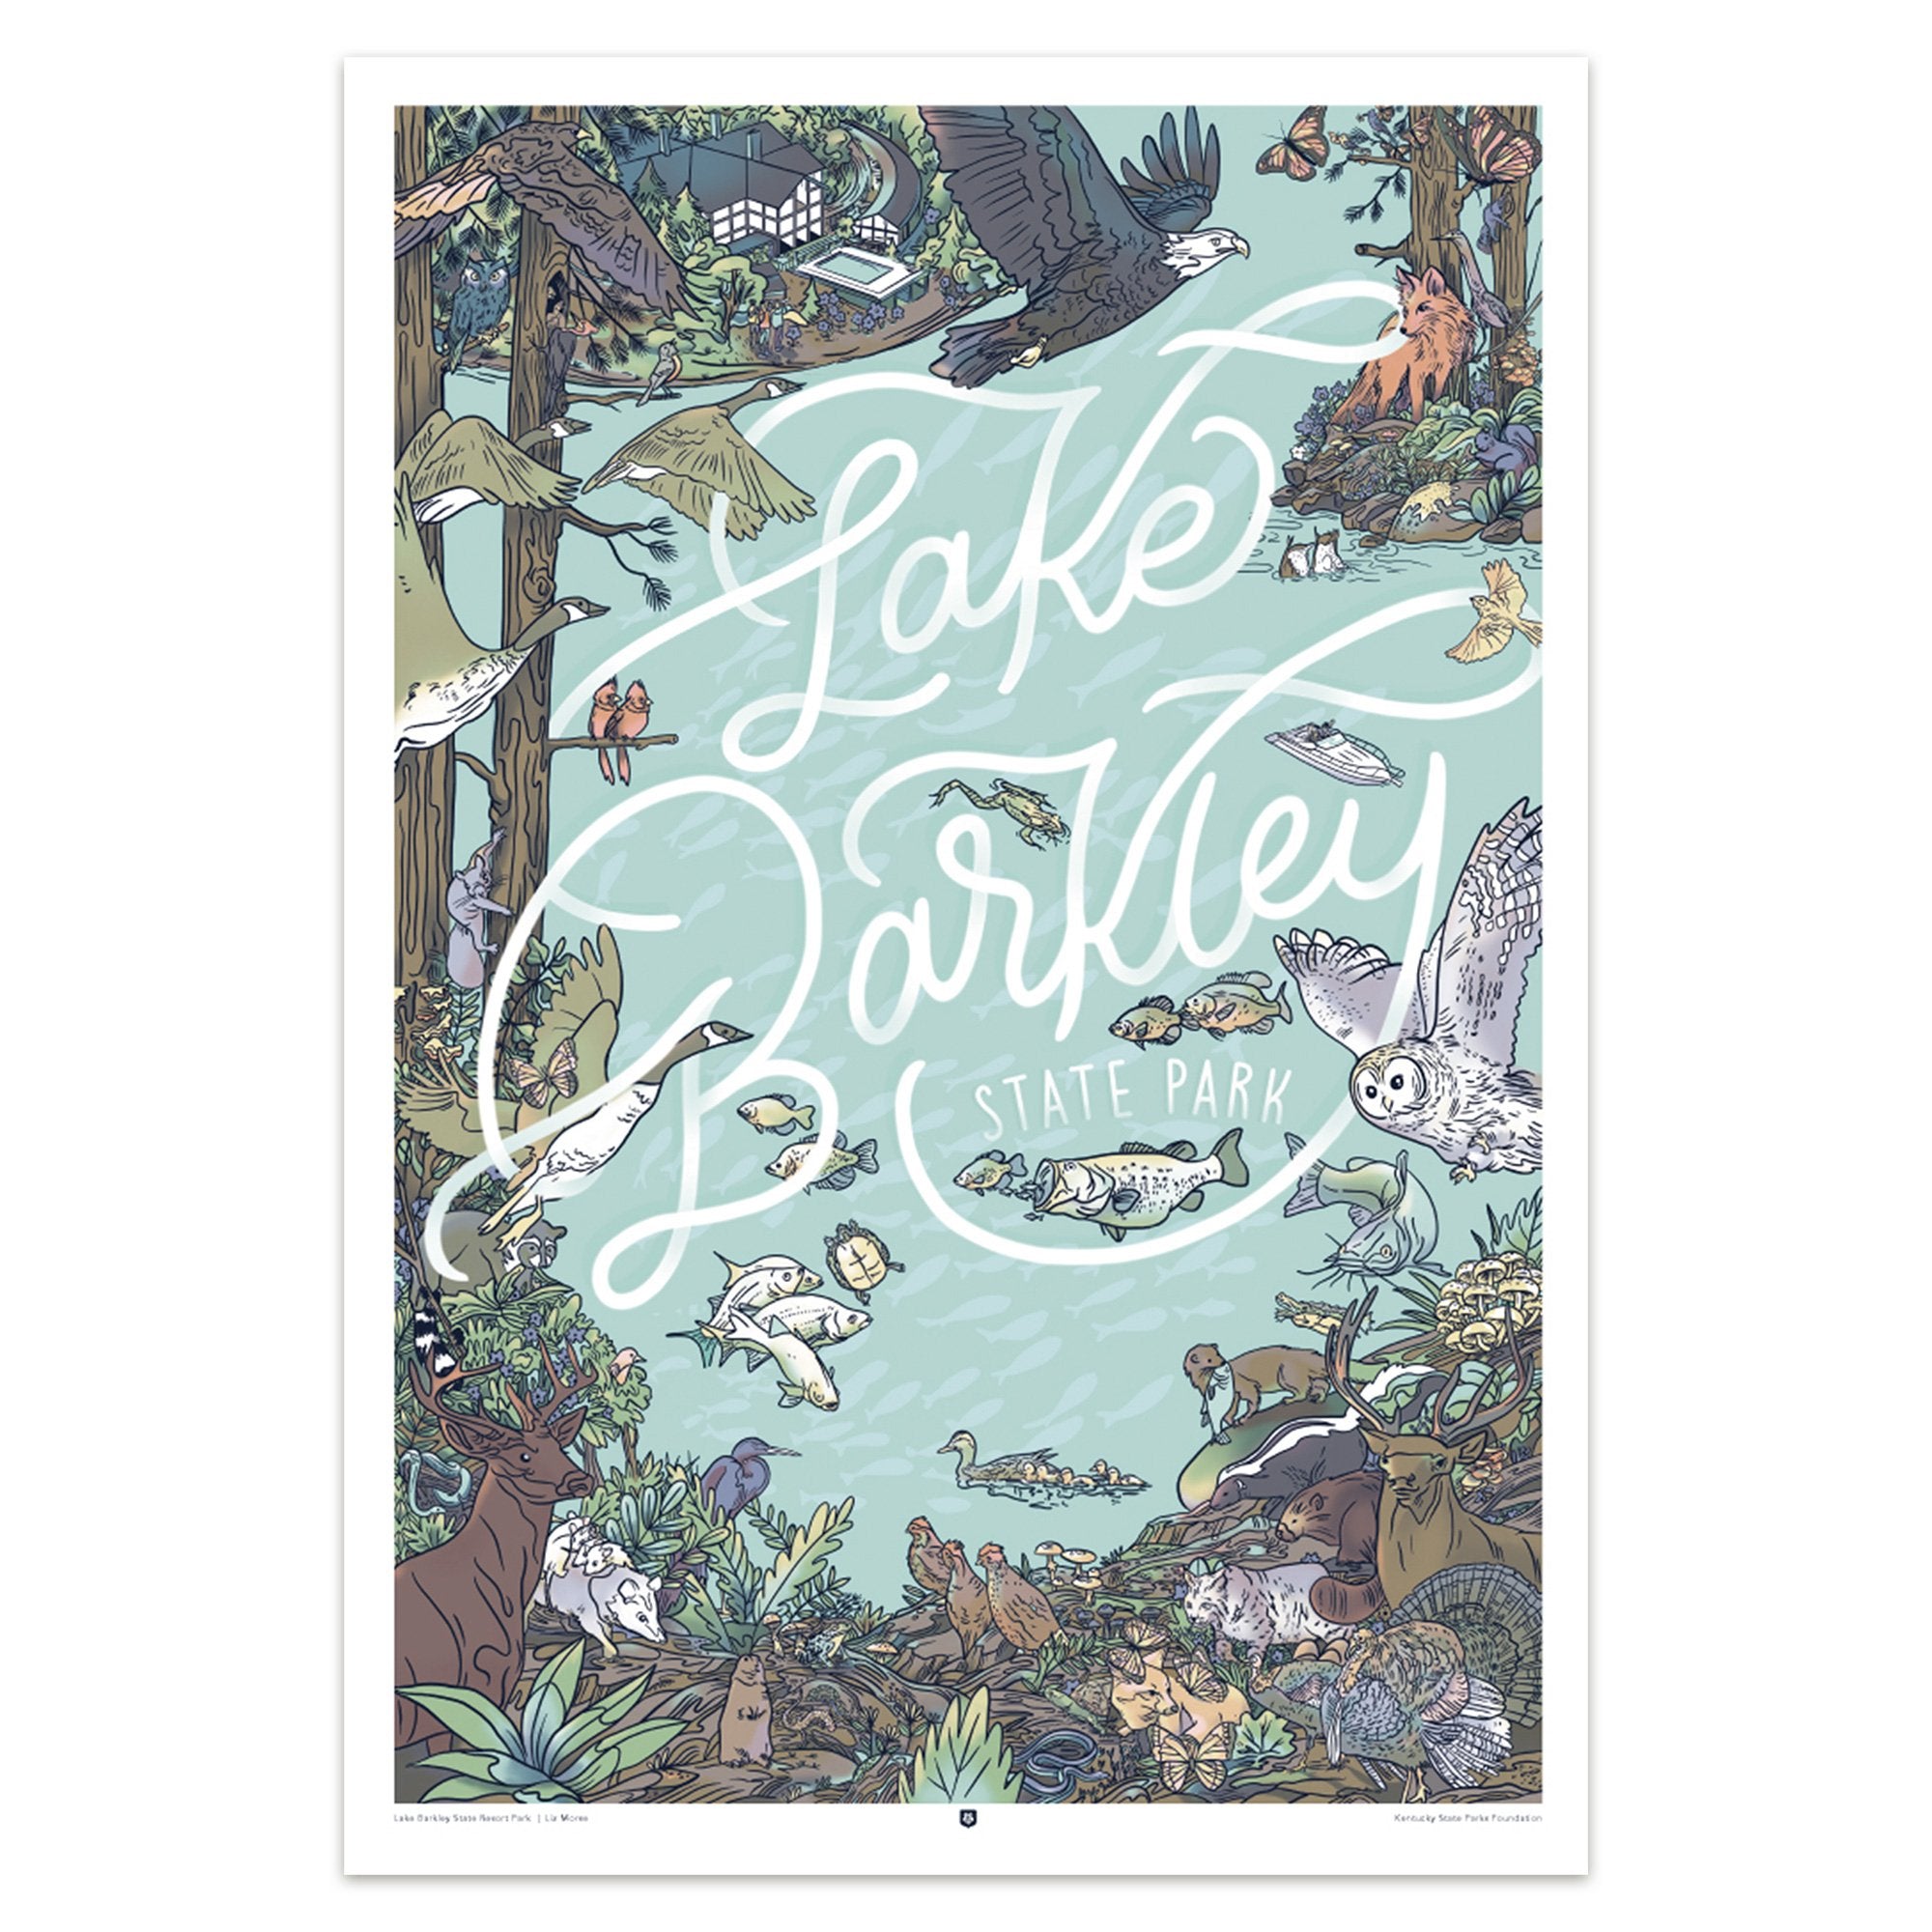 Lake Barkley State Park Poster by Liz Morse-KY for KY Store